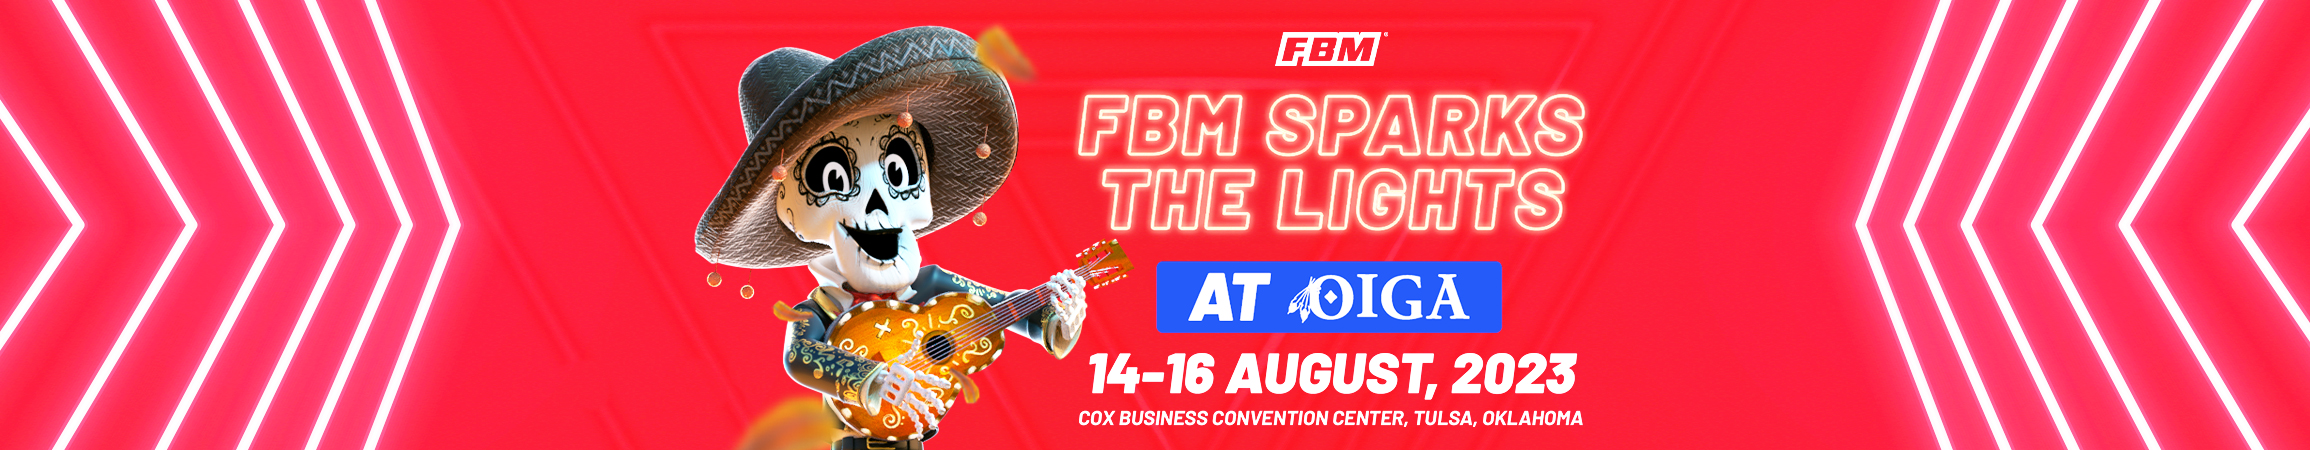 FBM® sparks the lights at OIGA Conference and Tradeshow 2023